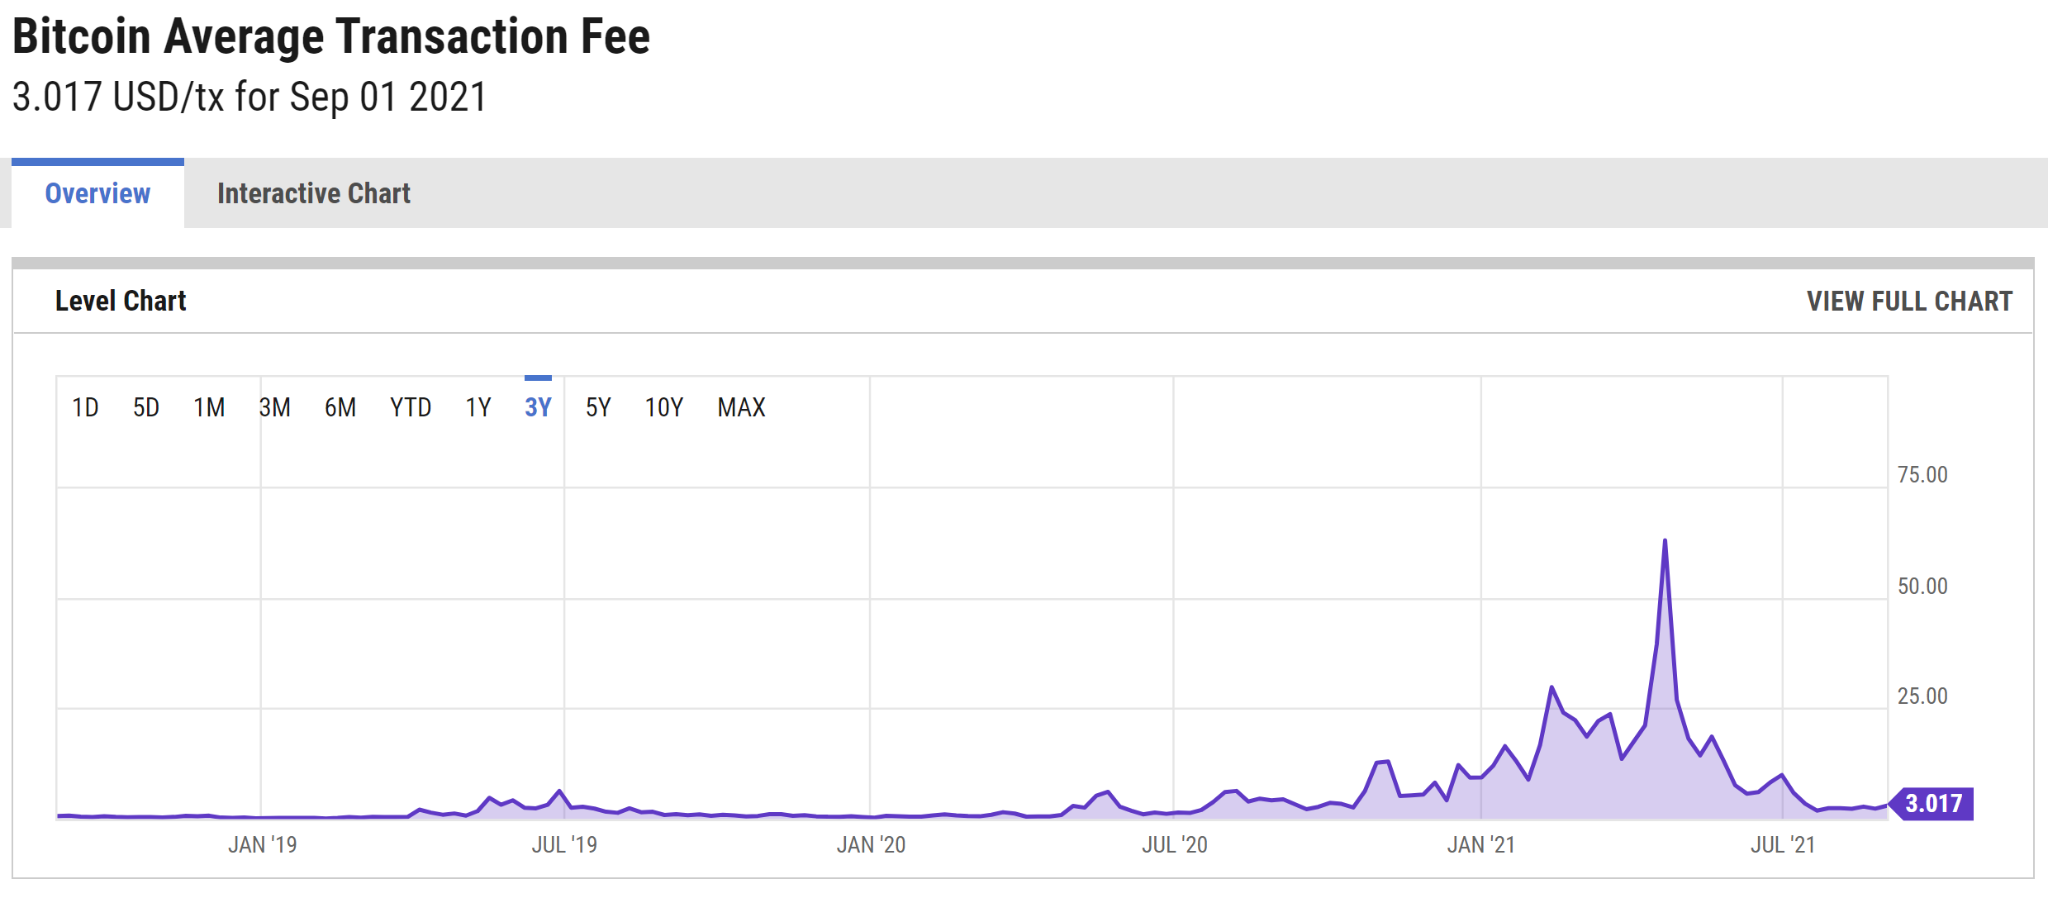 A graph showing the average Bitcoin Transaction fee